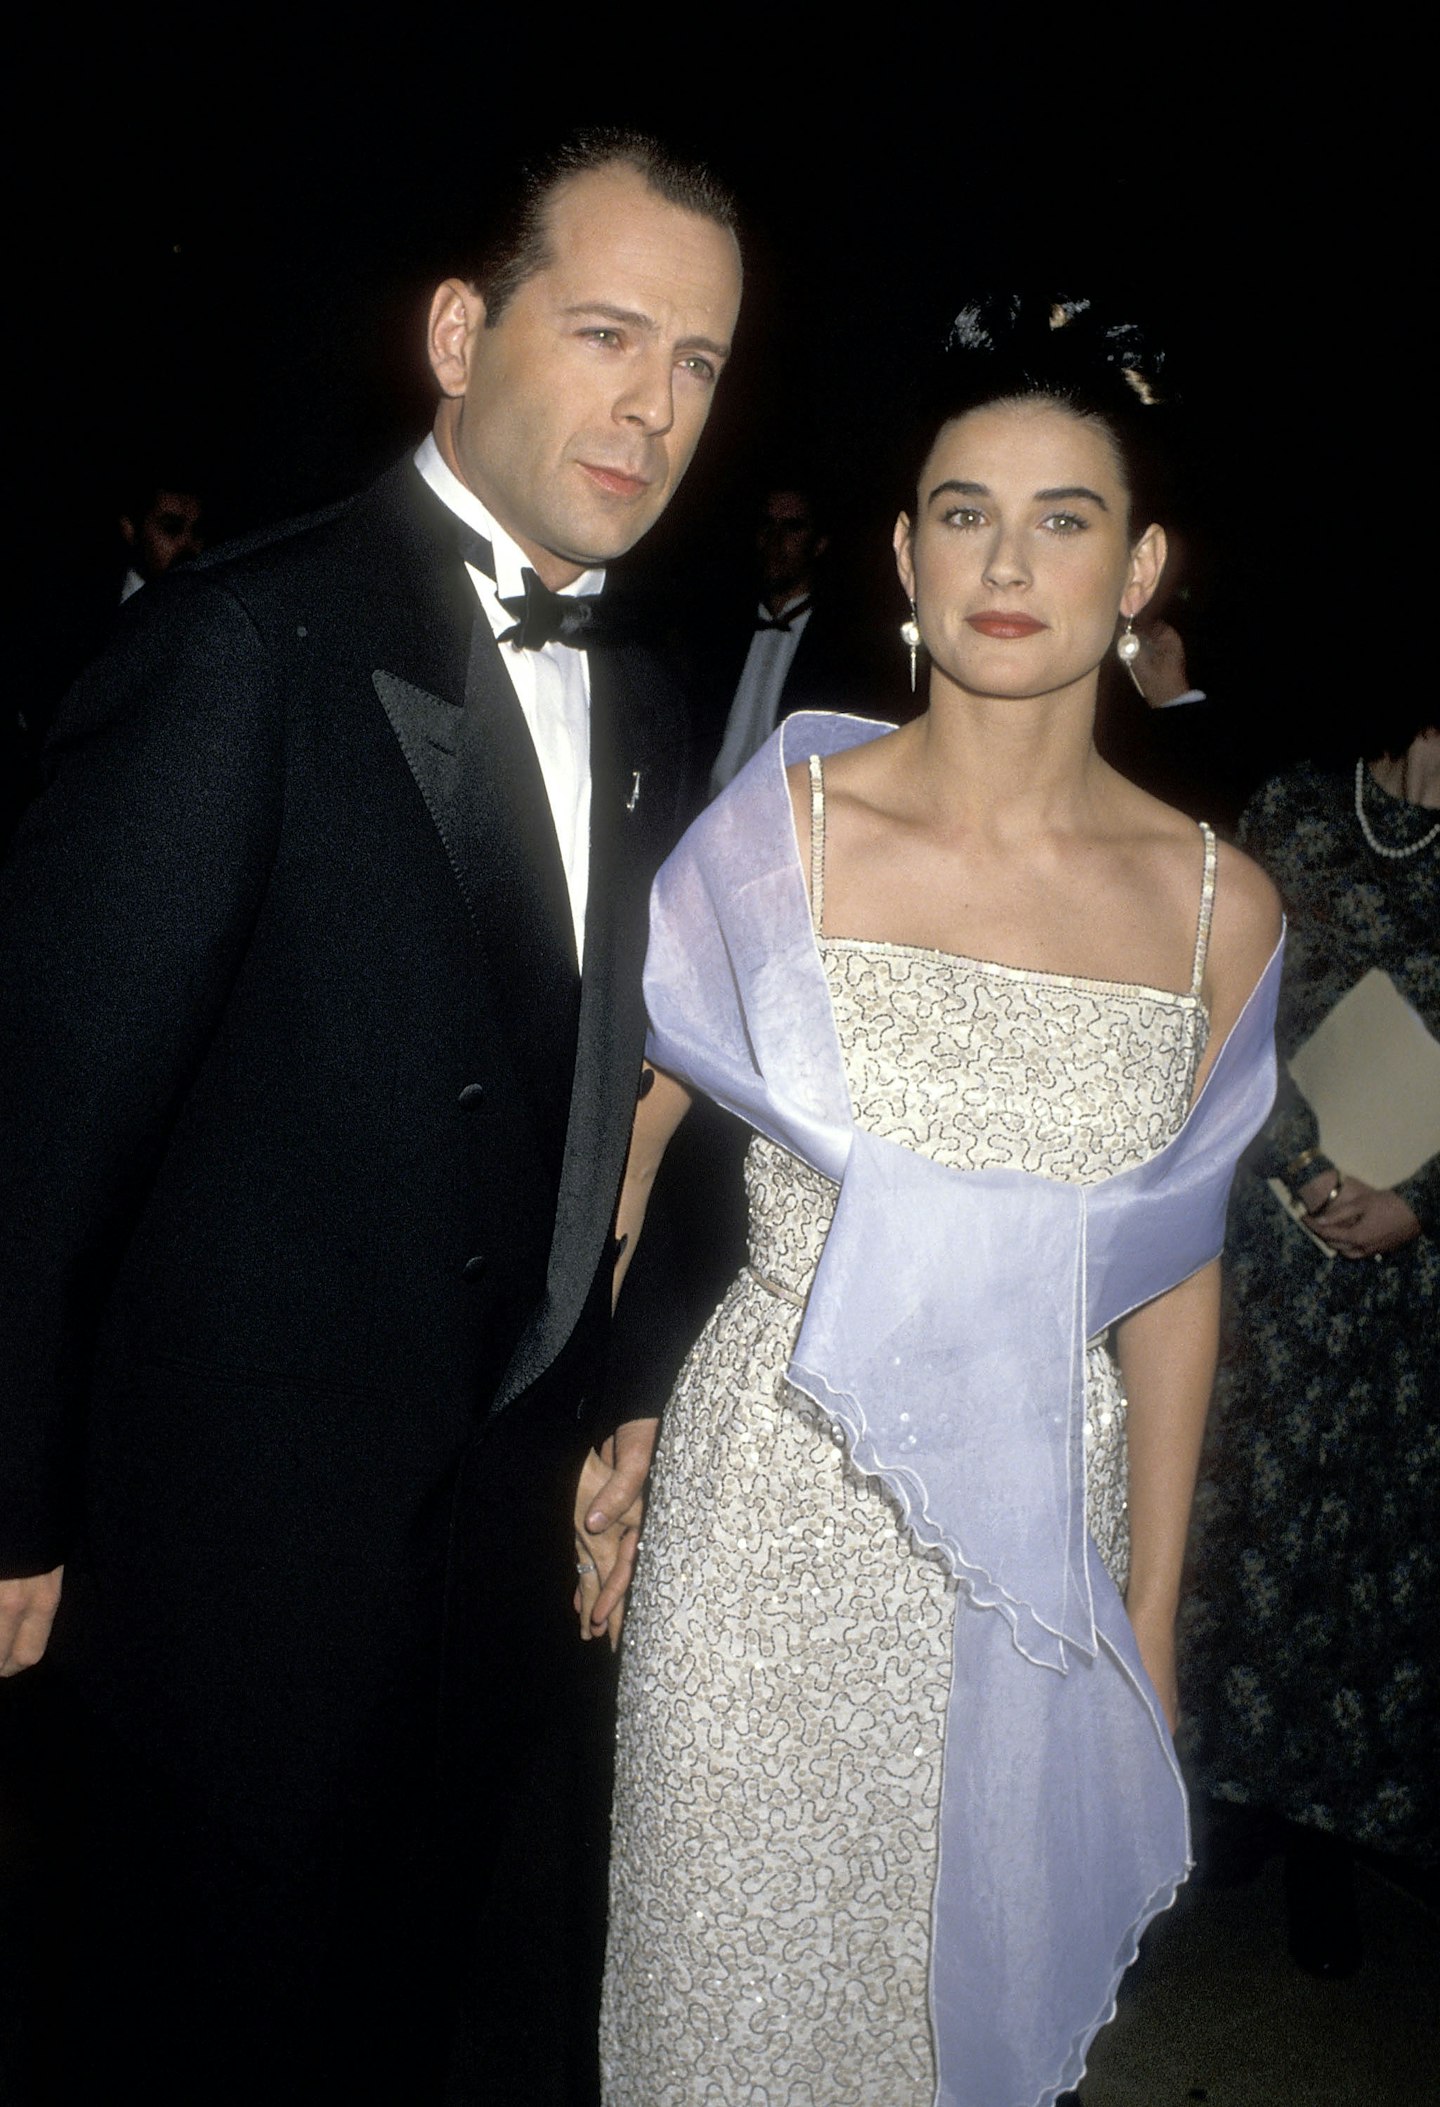 1987 – Demi Moore and Bruce Willis